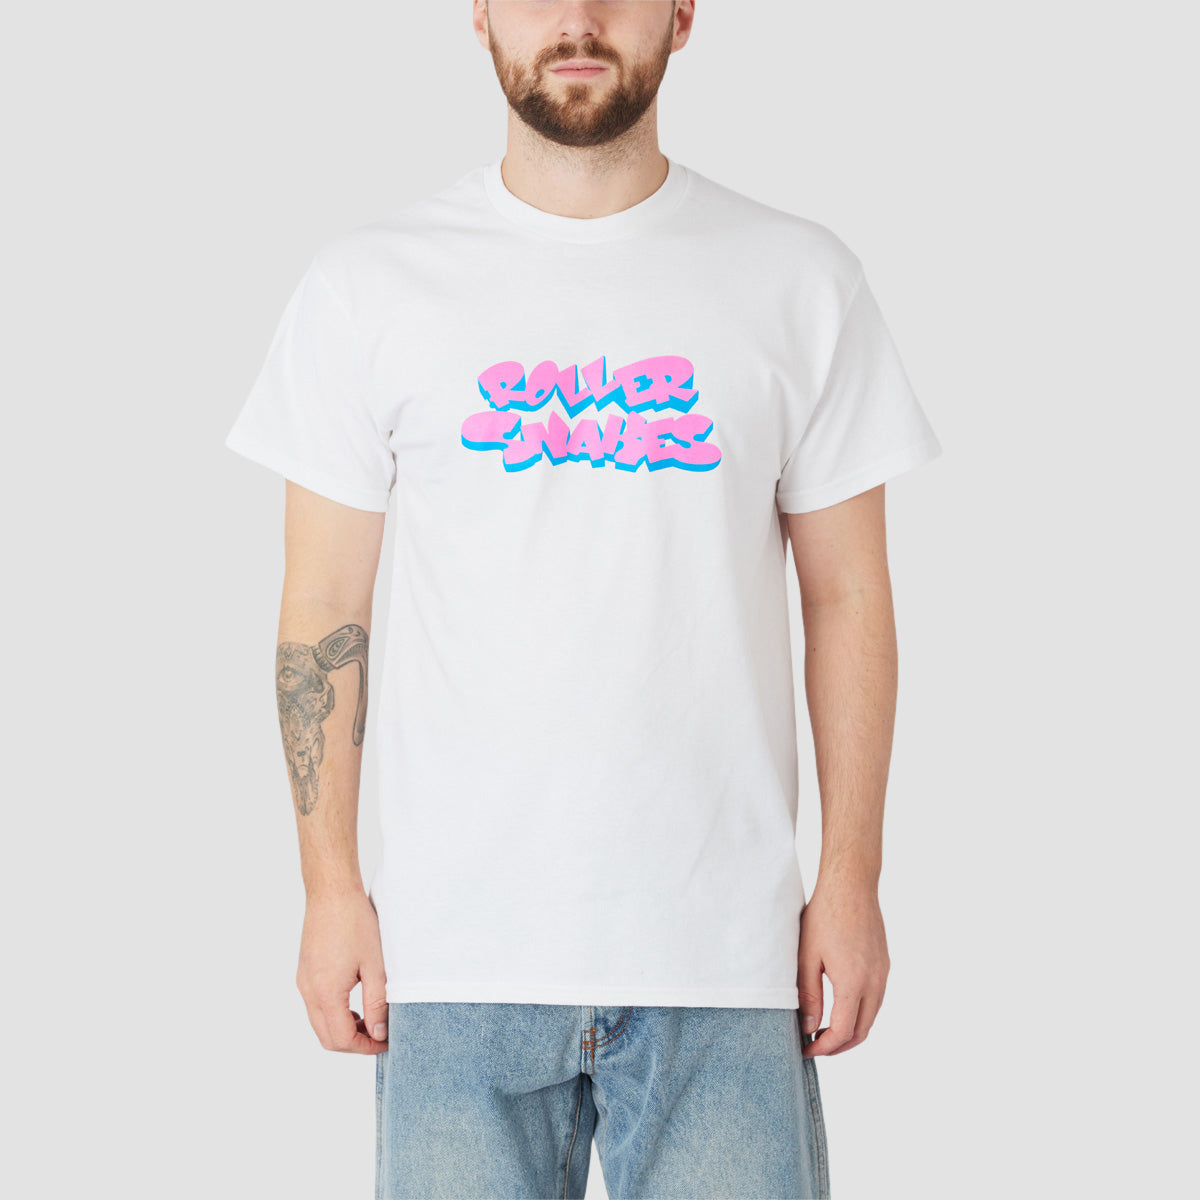 Rollersnakes Marian T-Shirt White